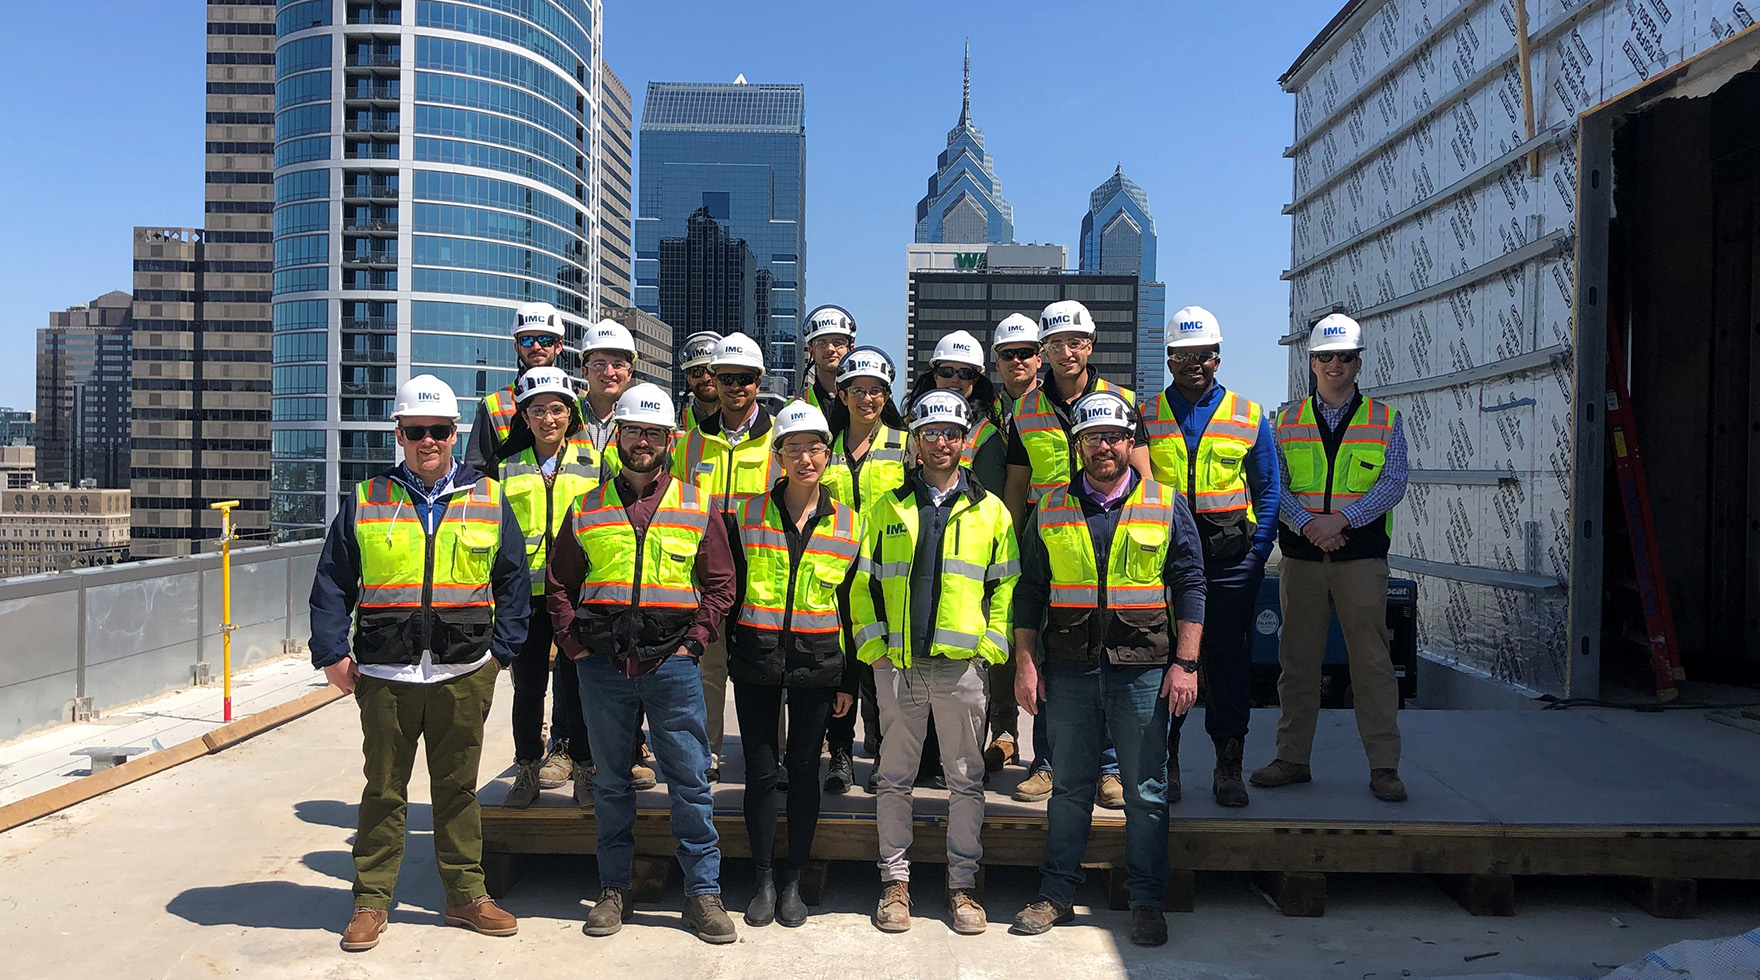 A group of IMC employees on 2222 Market Street project site wearing safety helmets and vests.